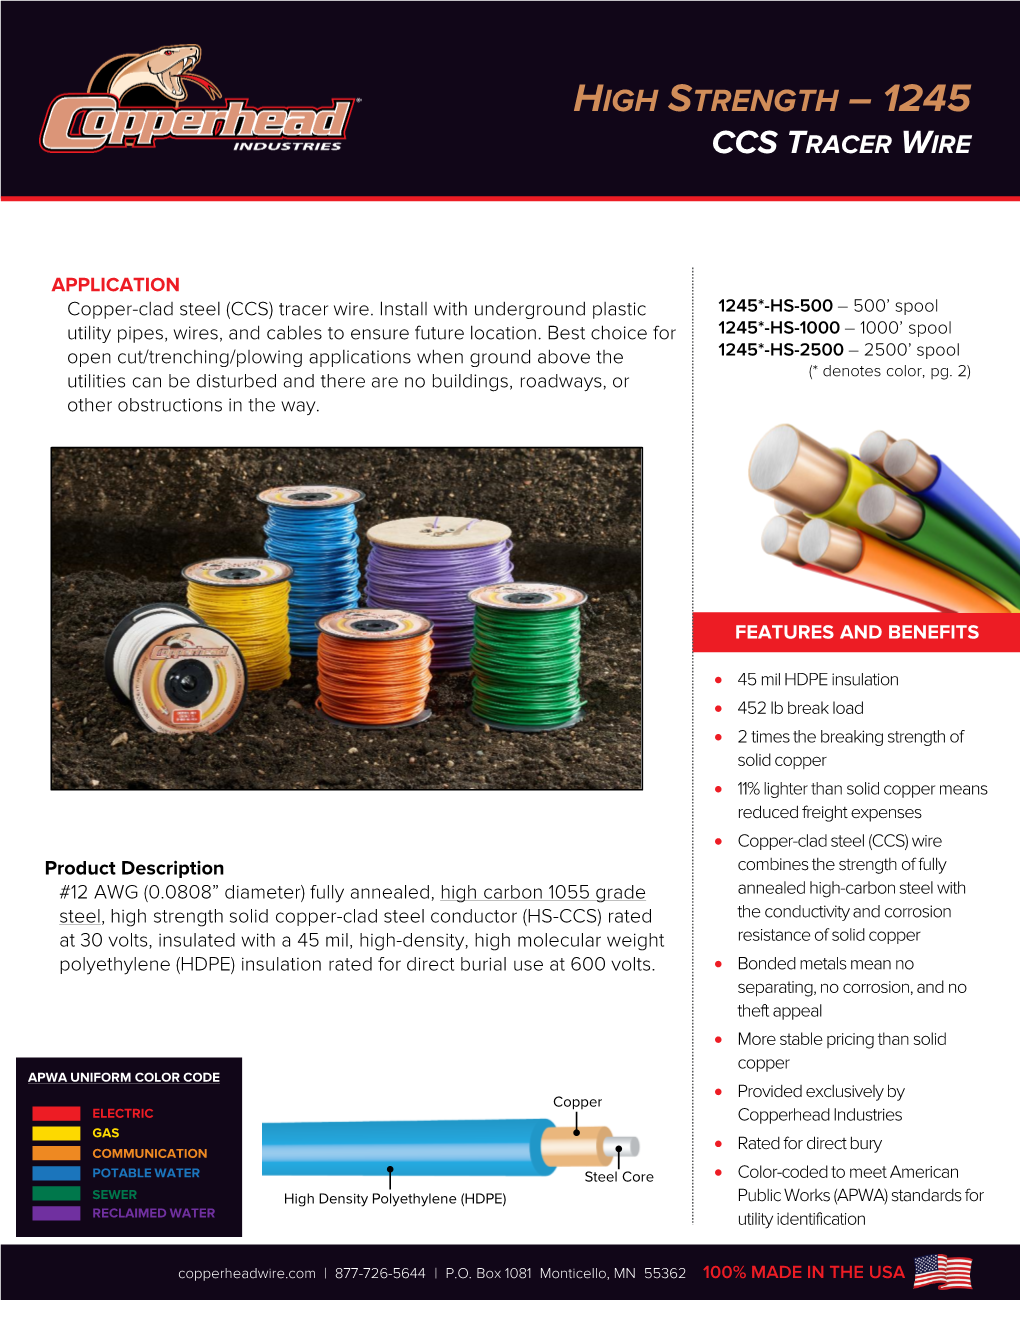 High Strength – 1245 Ccs Tracer Wire